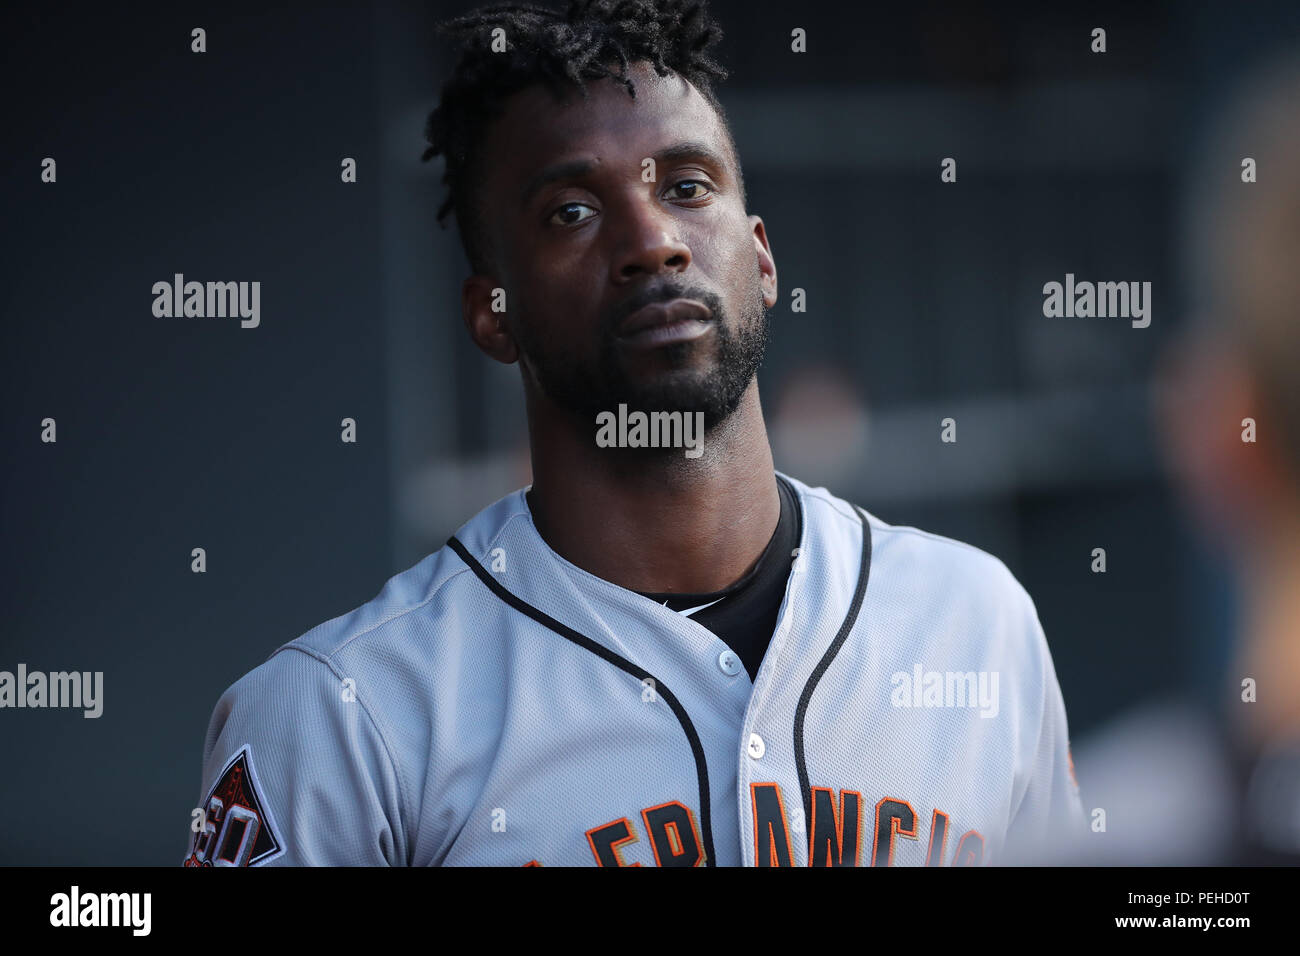 Los Angeles, USA. August 15, 2018: San Francisco Giants center